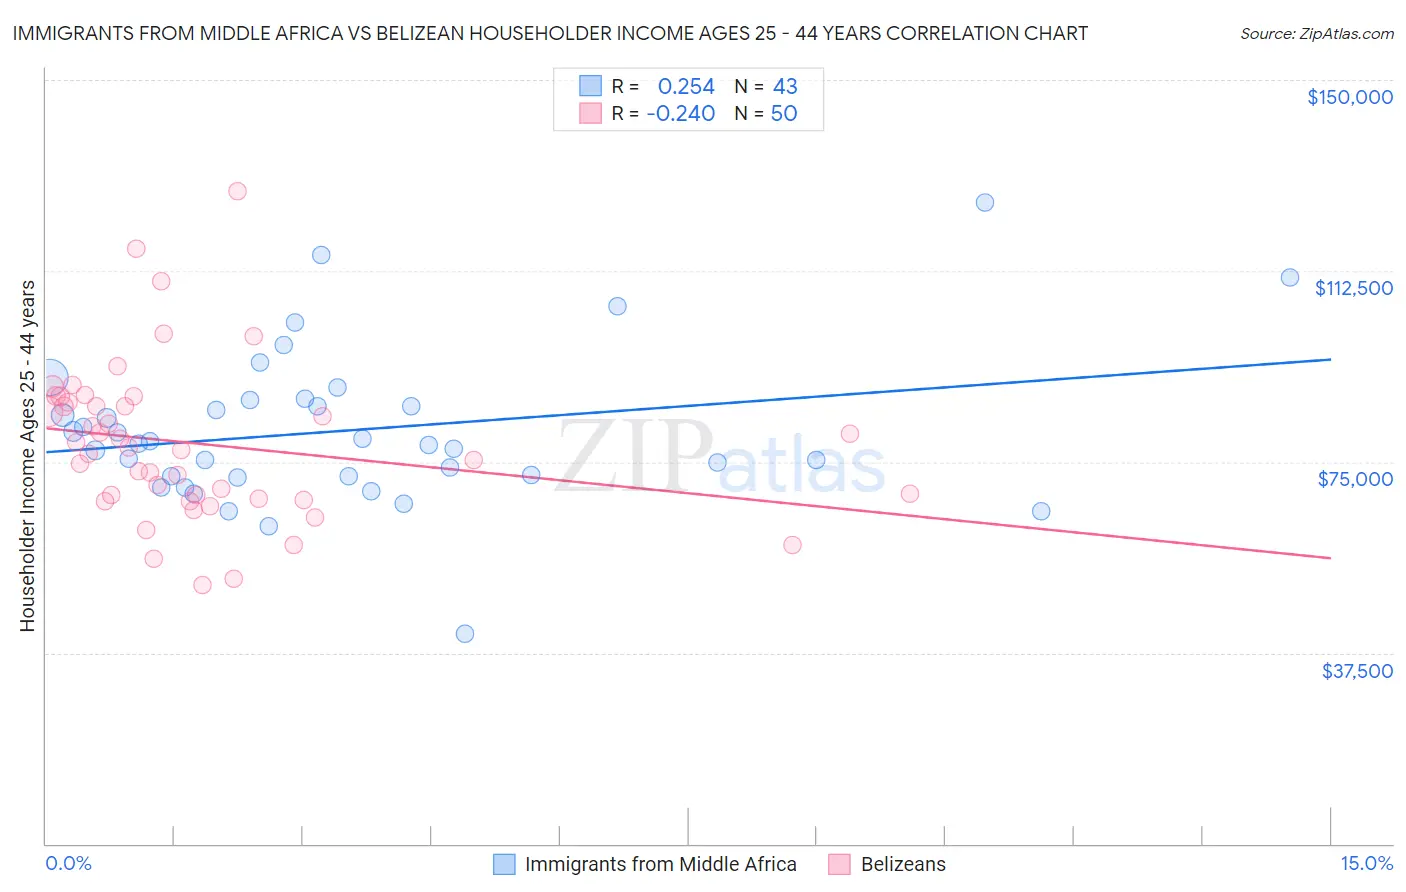 Immigrants from Middle Africa vs Belizean Householder Income Ages 25 - 44 years